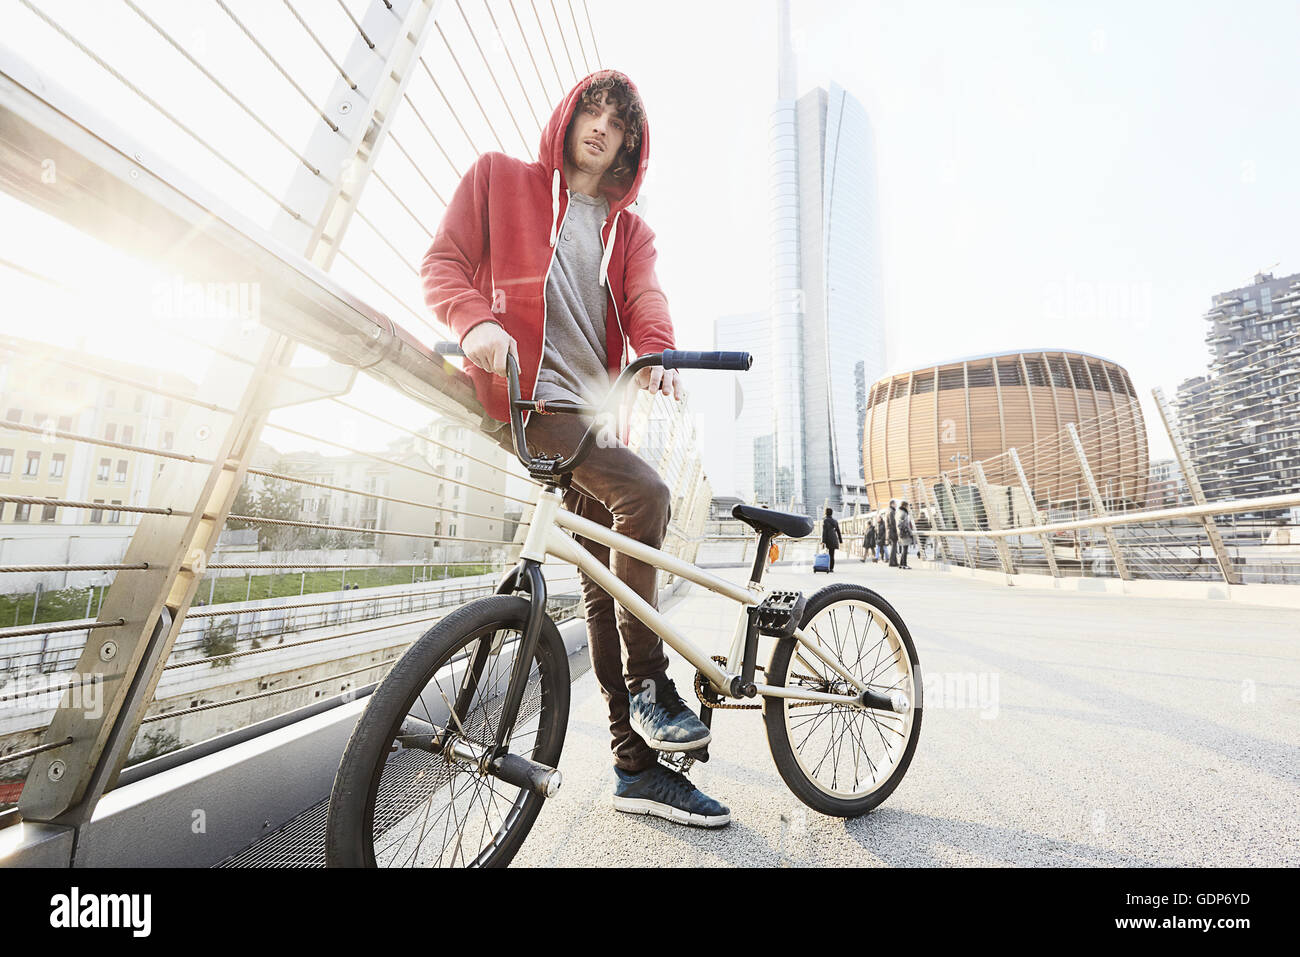 Man with BMX leaning against hand rail in urban area Stock Photo